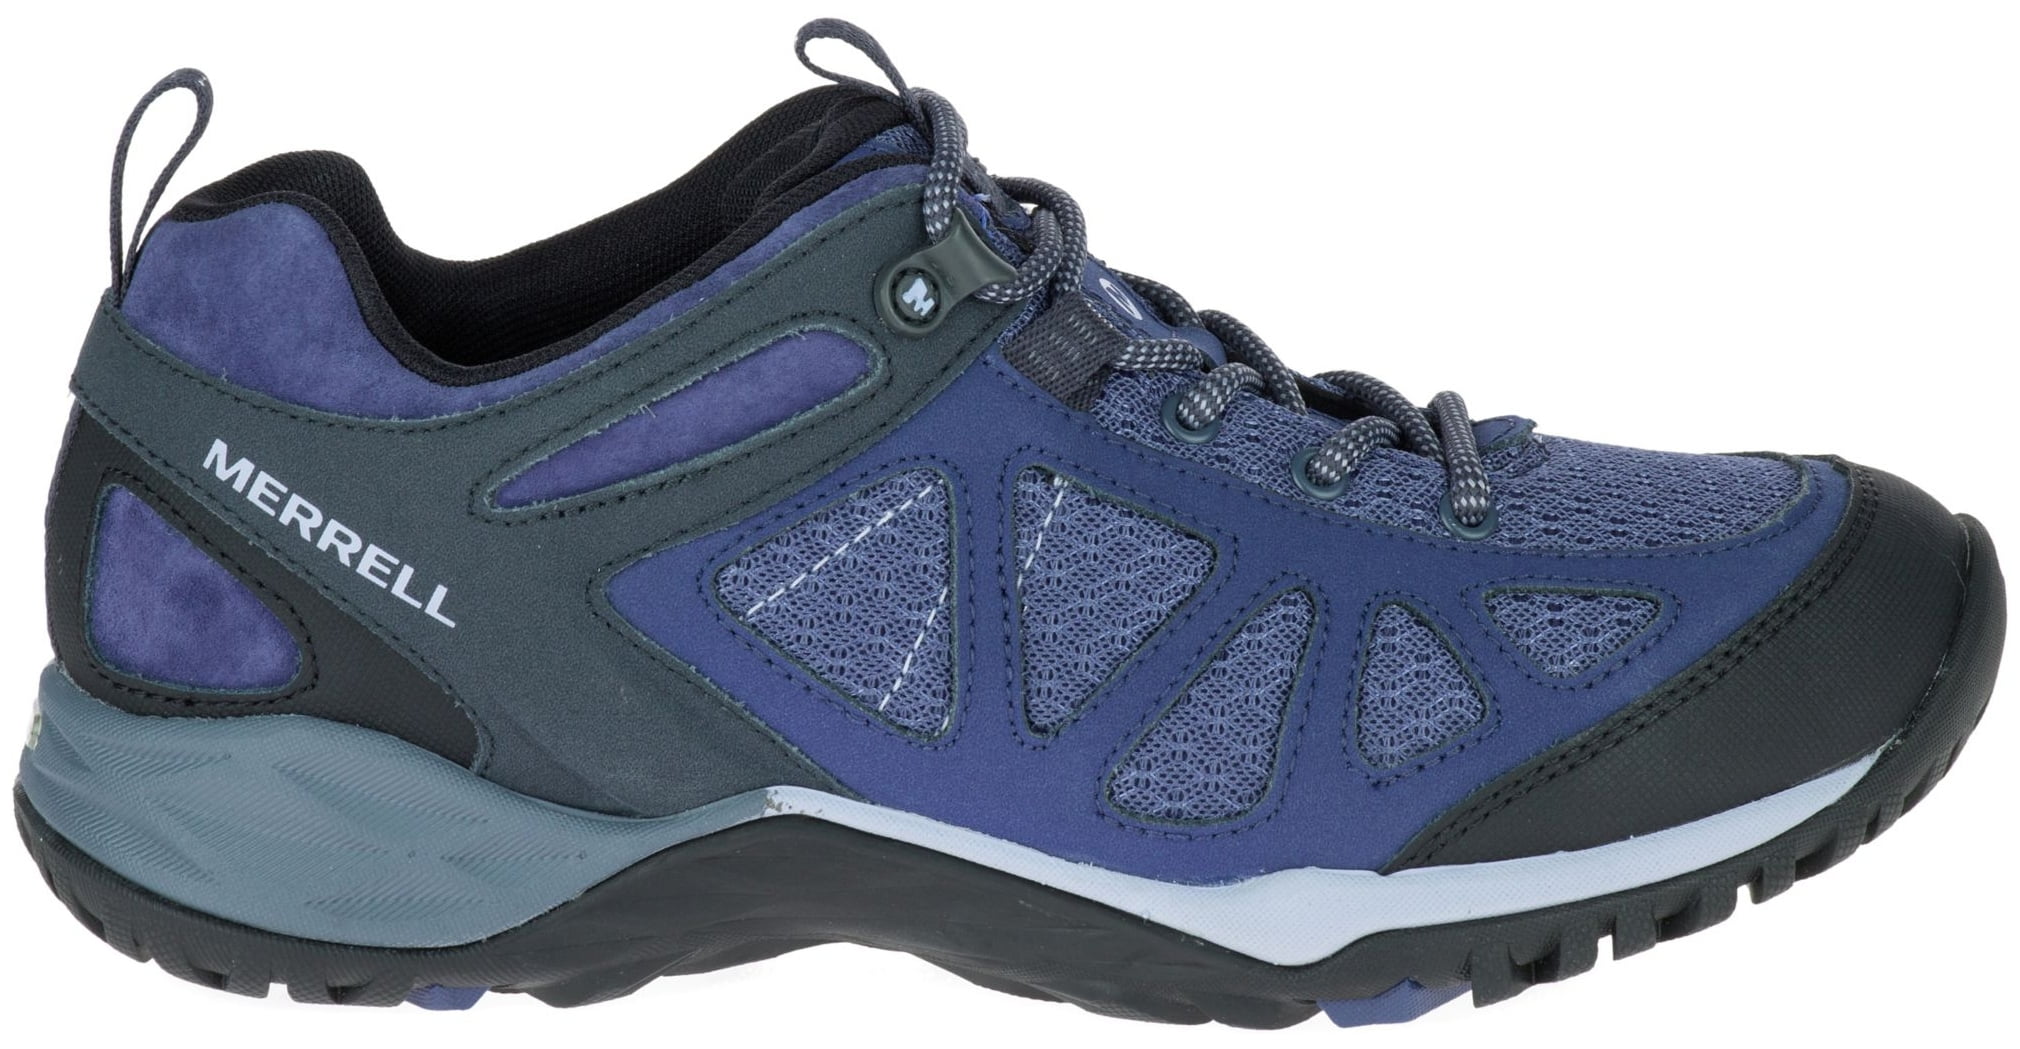 Merrell Womens Siren Sport Q2 Hiking Shoes Blue Lace Up Sneakers J37462 7.5 New 